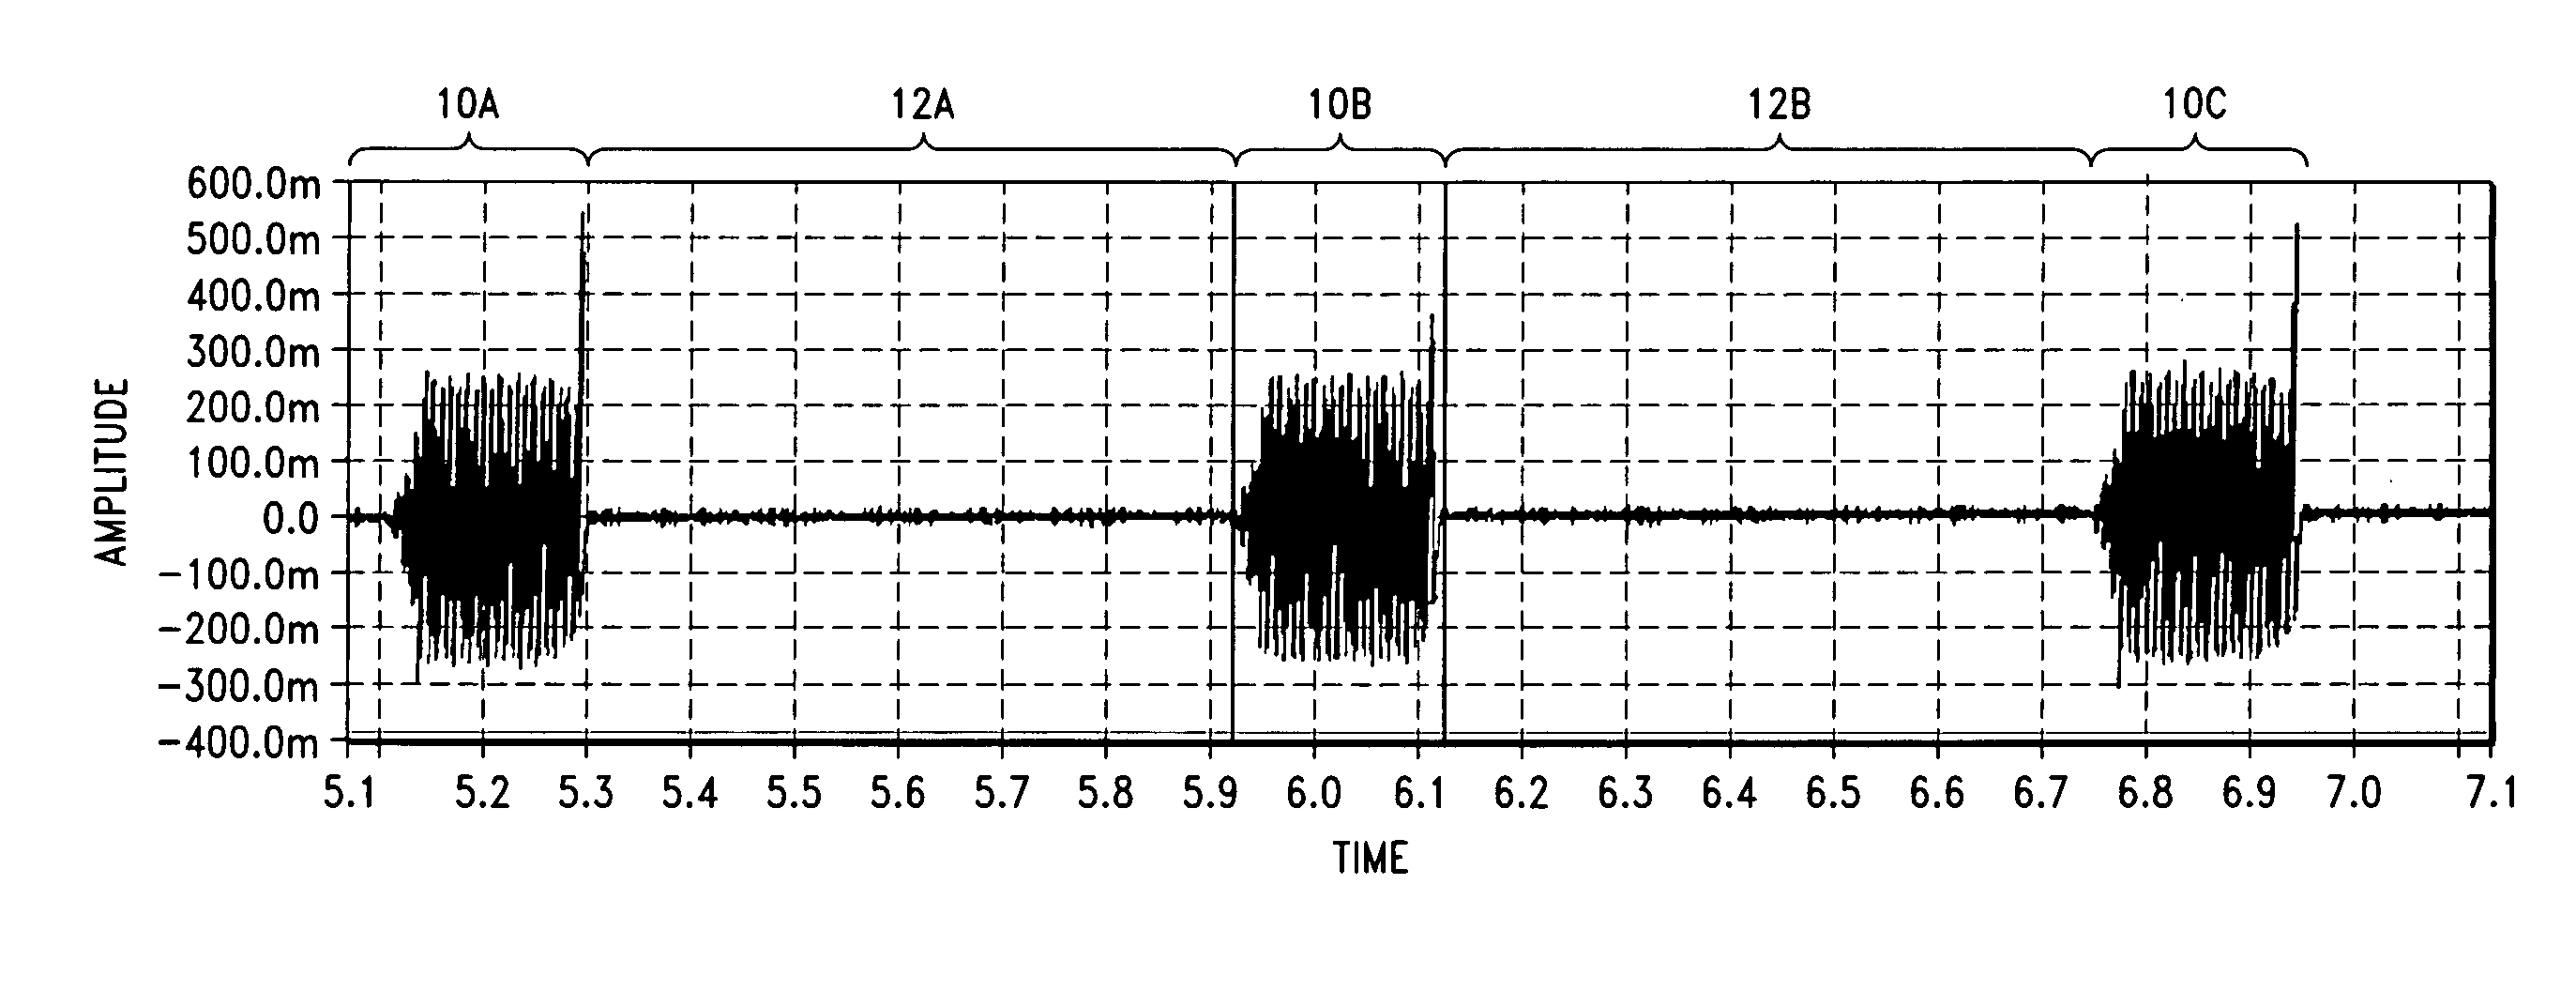 Method and system to control respiration by means of simulated neuro-electrical coded signals